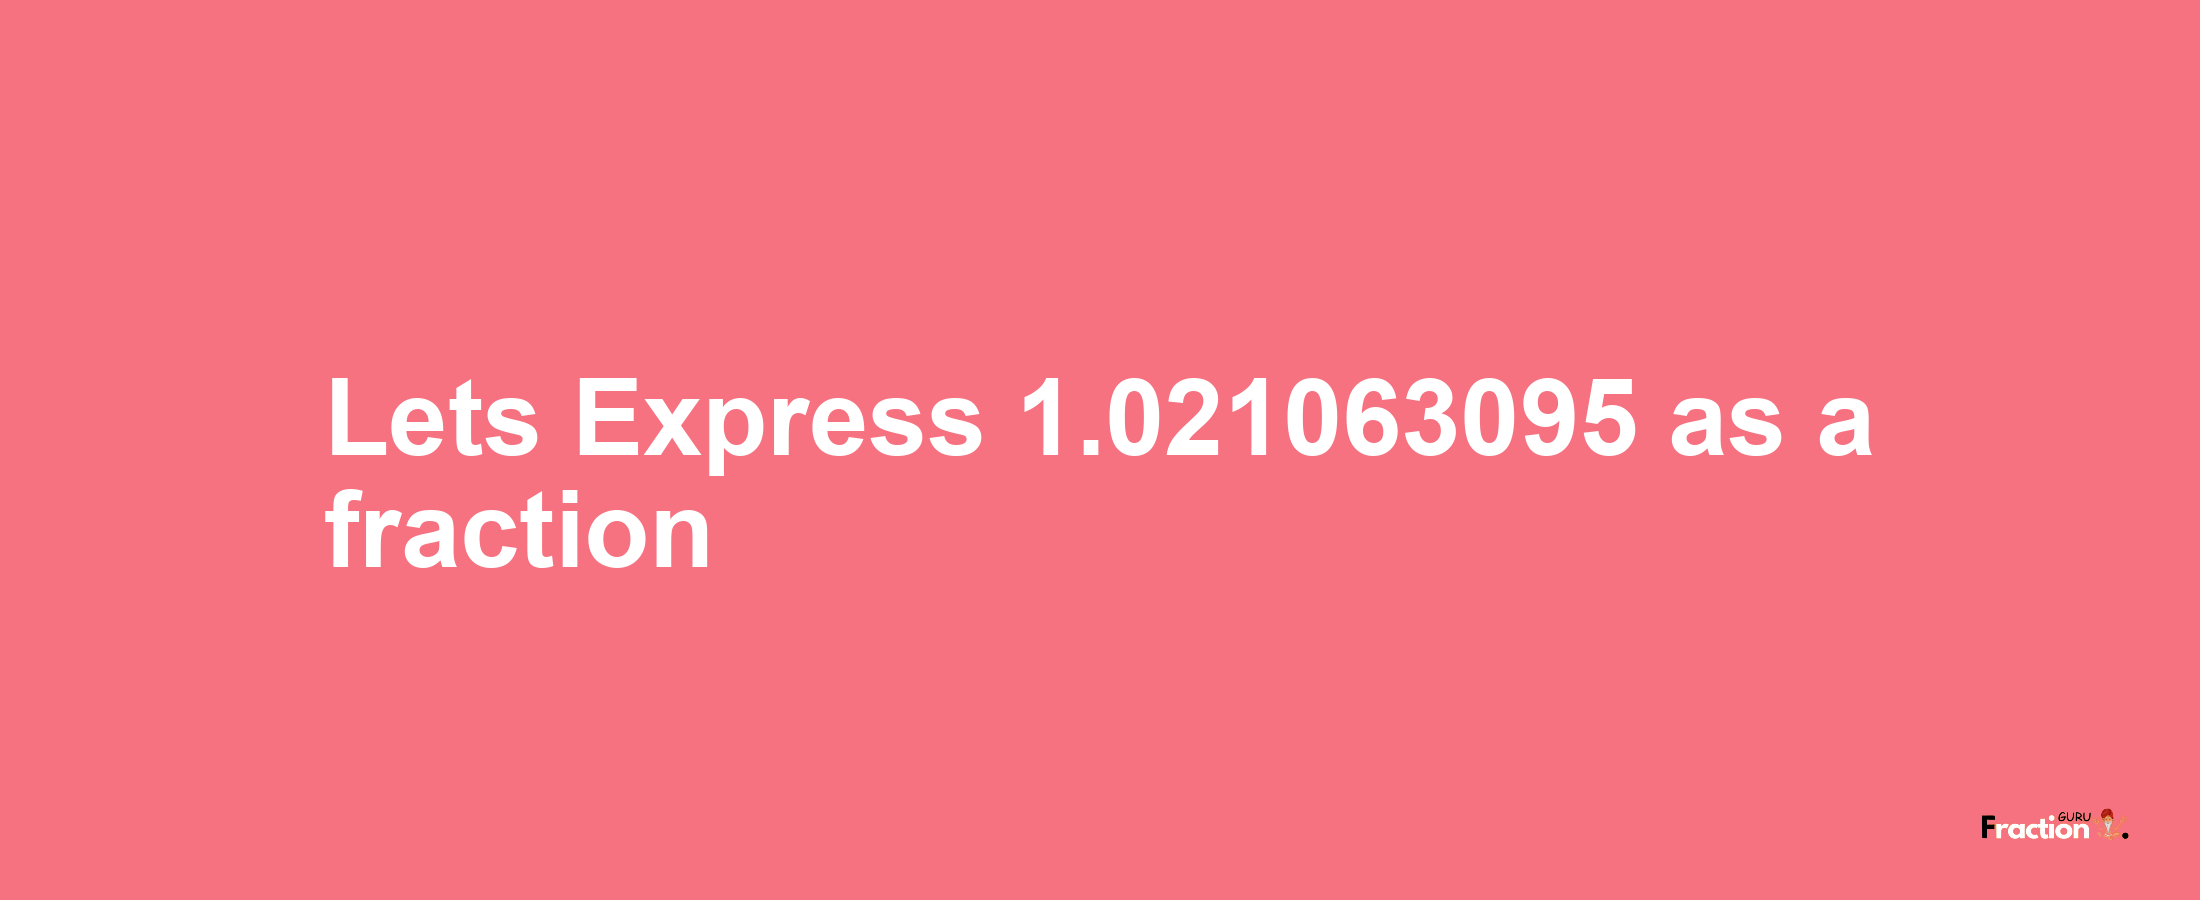 Lets Express 1.021063095 as afraction